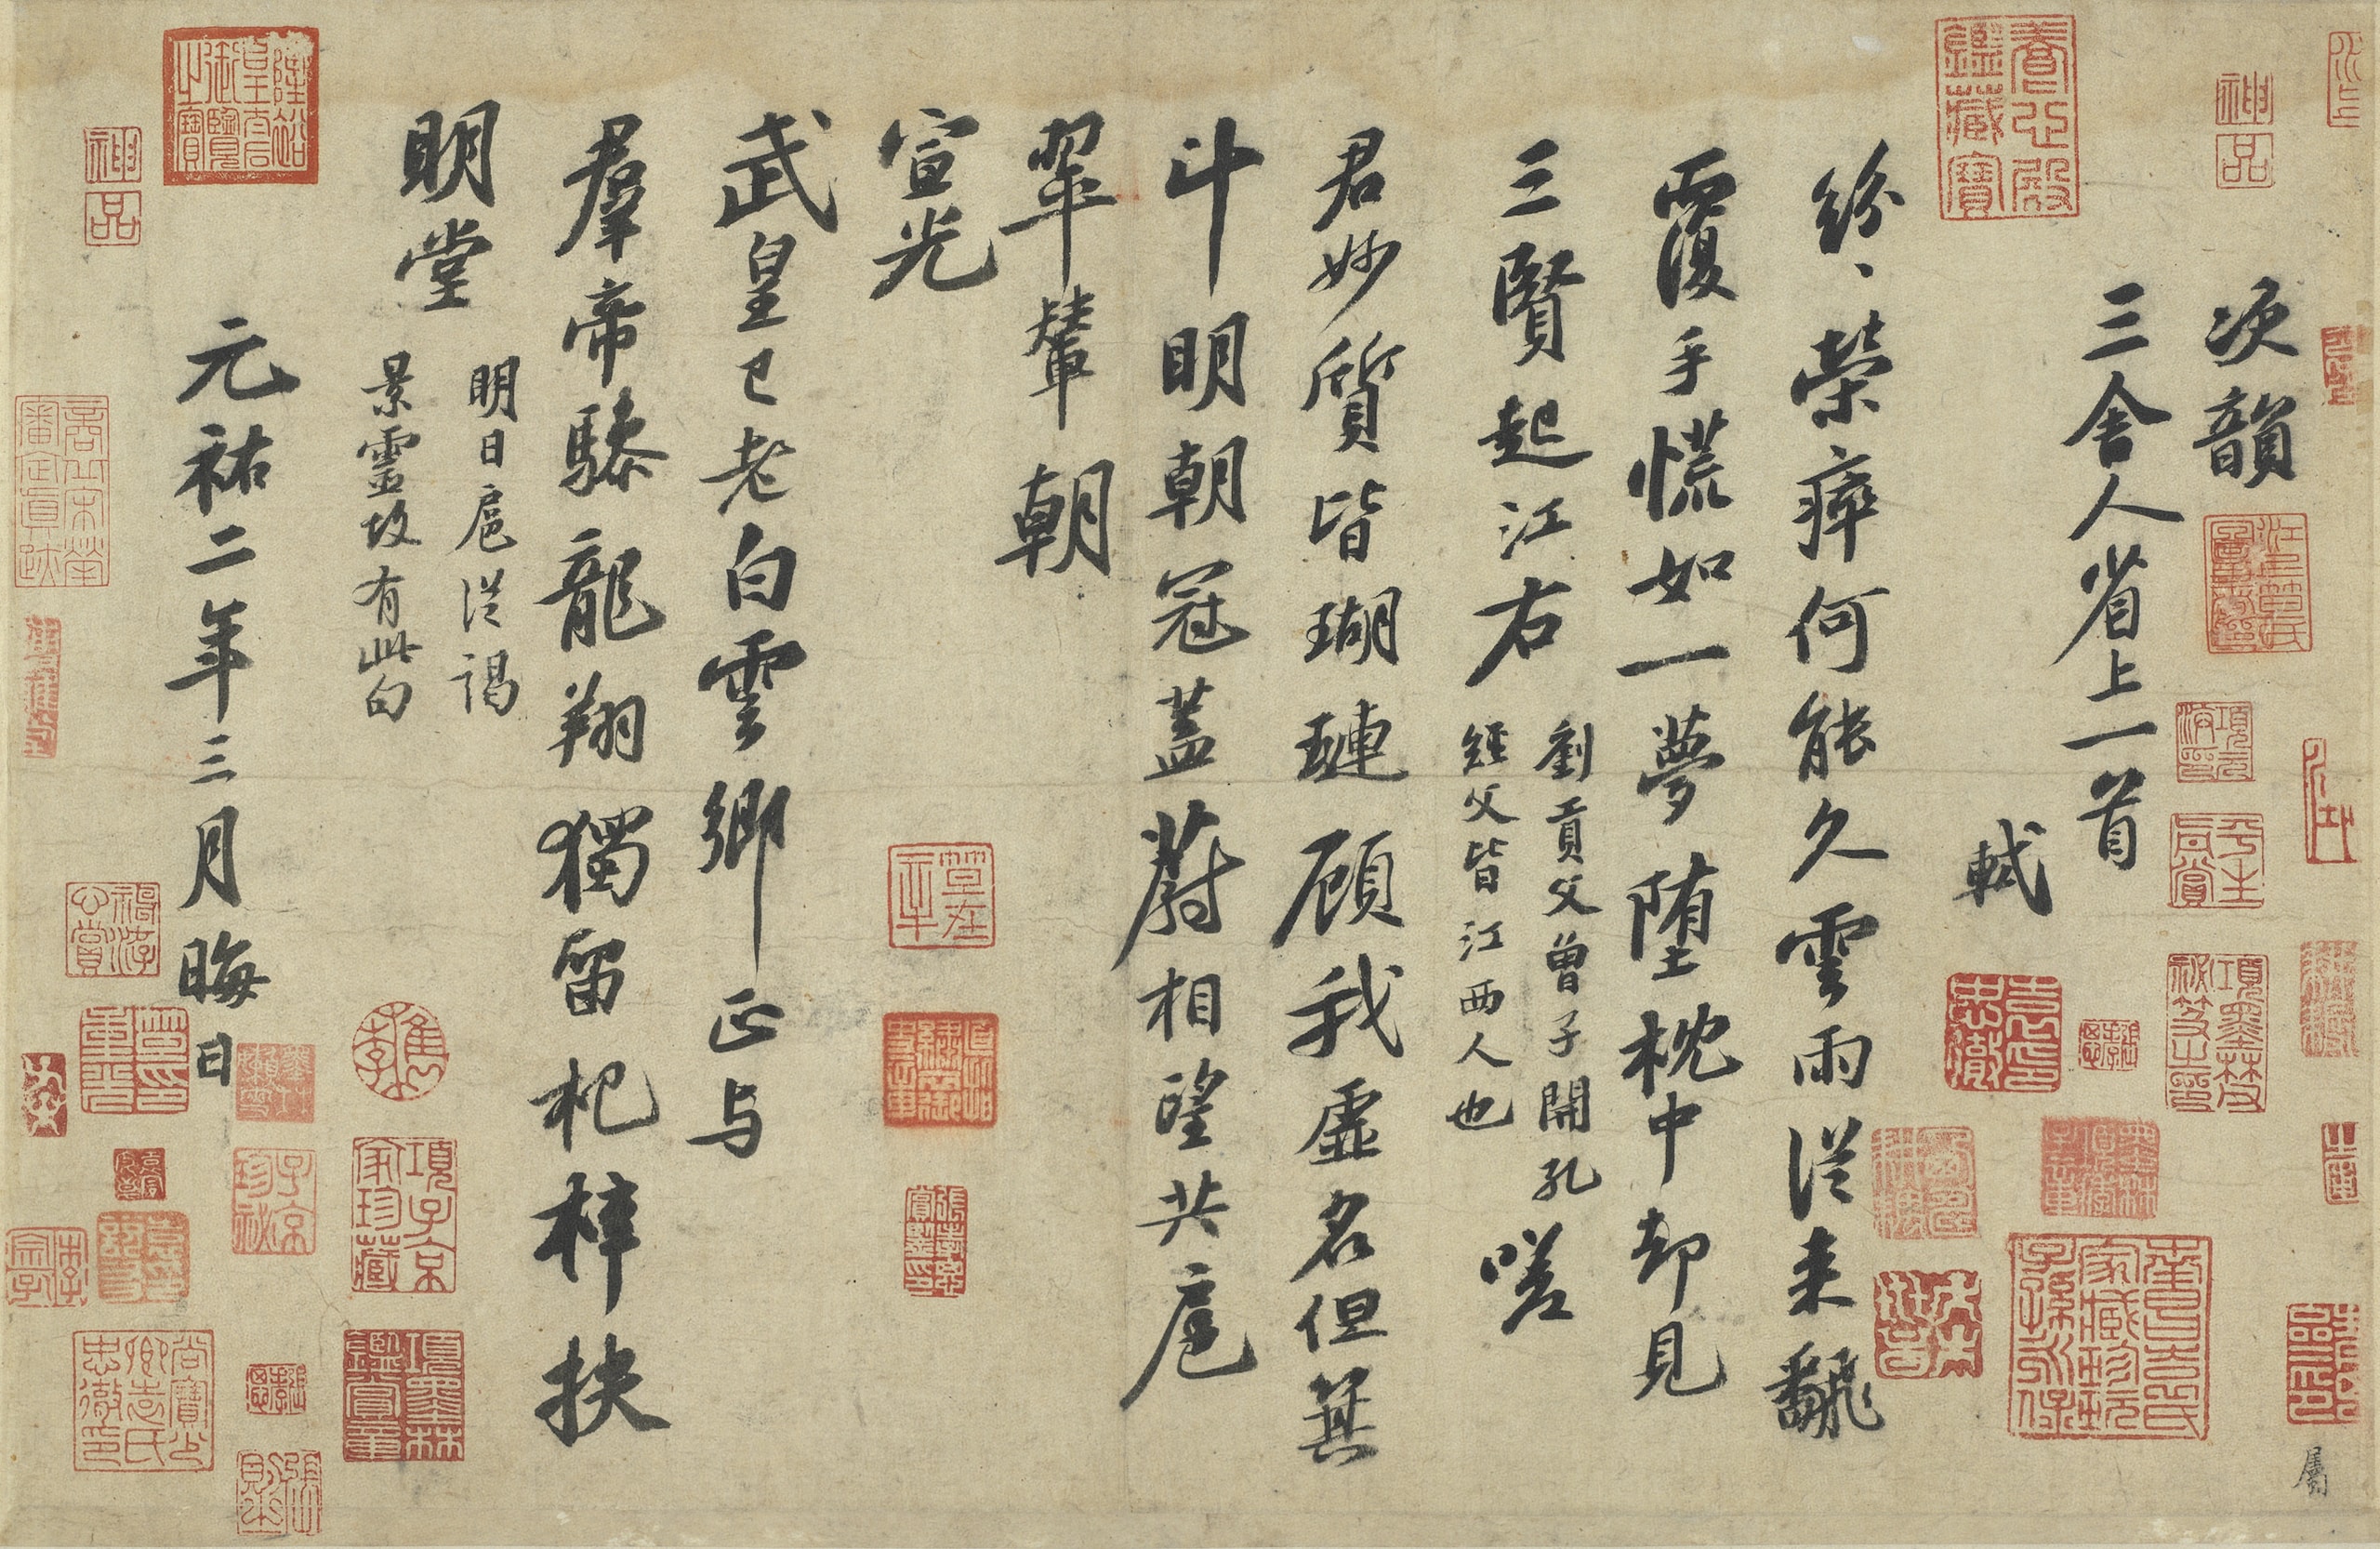 Calligraphy of the Four Song Masters